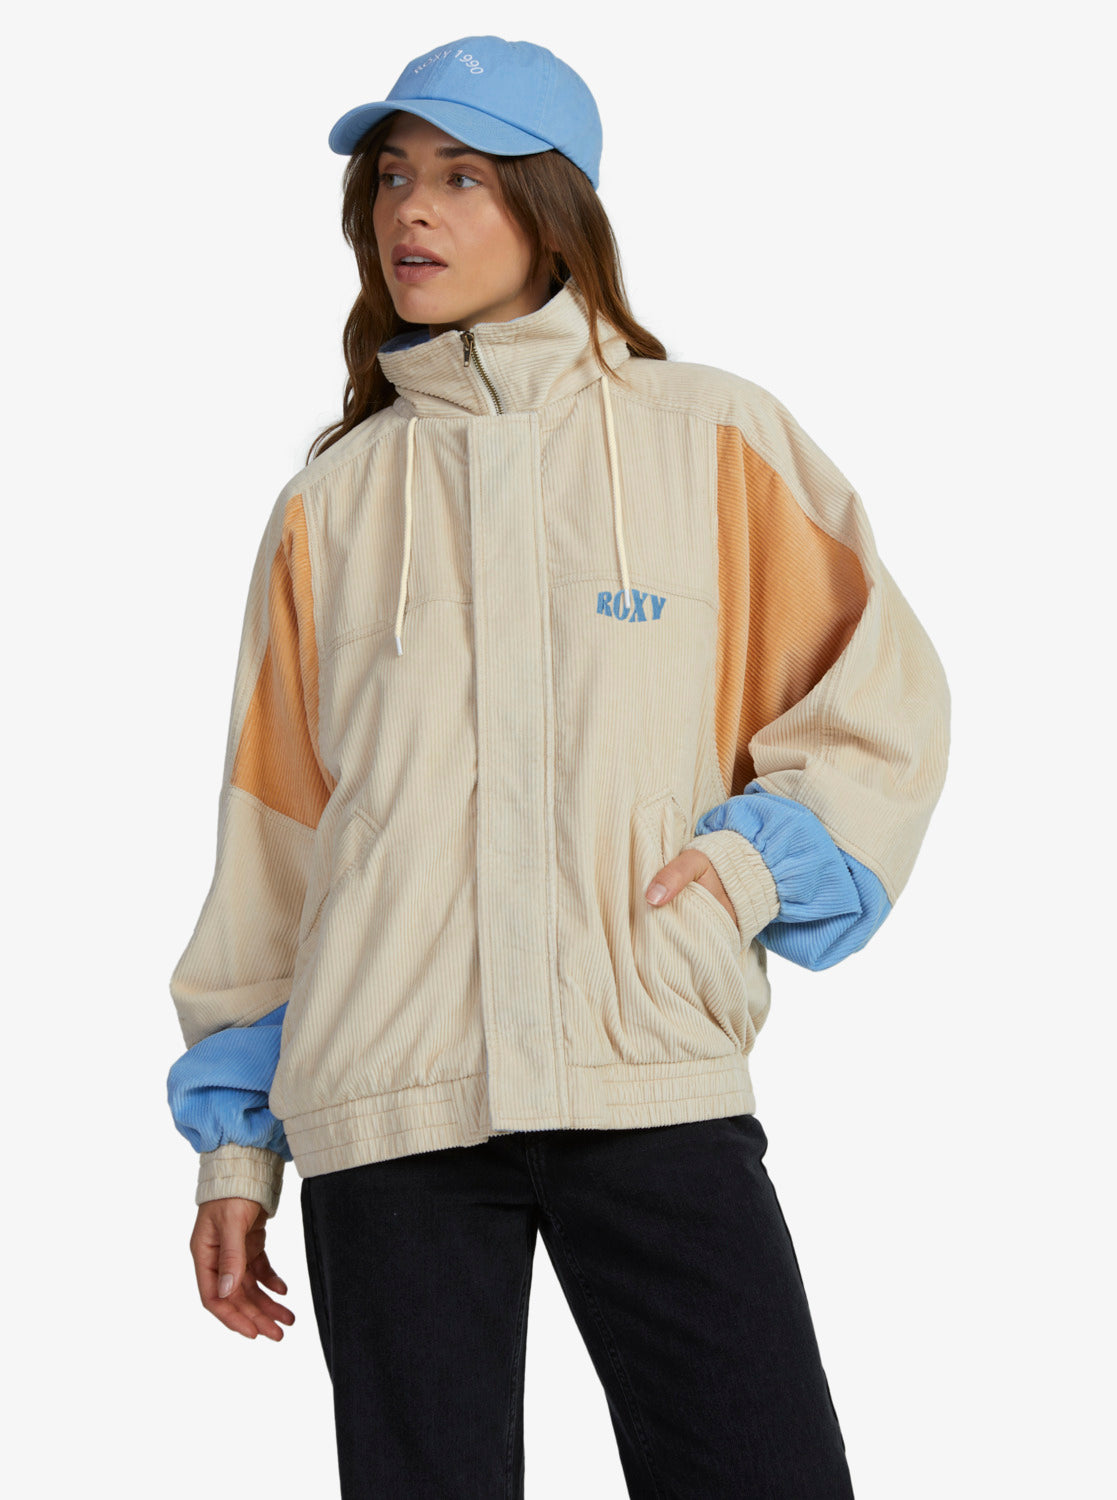 Roxy Strike A Cord Jacket in tapioca colourway on model from front